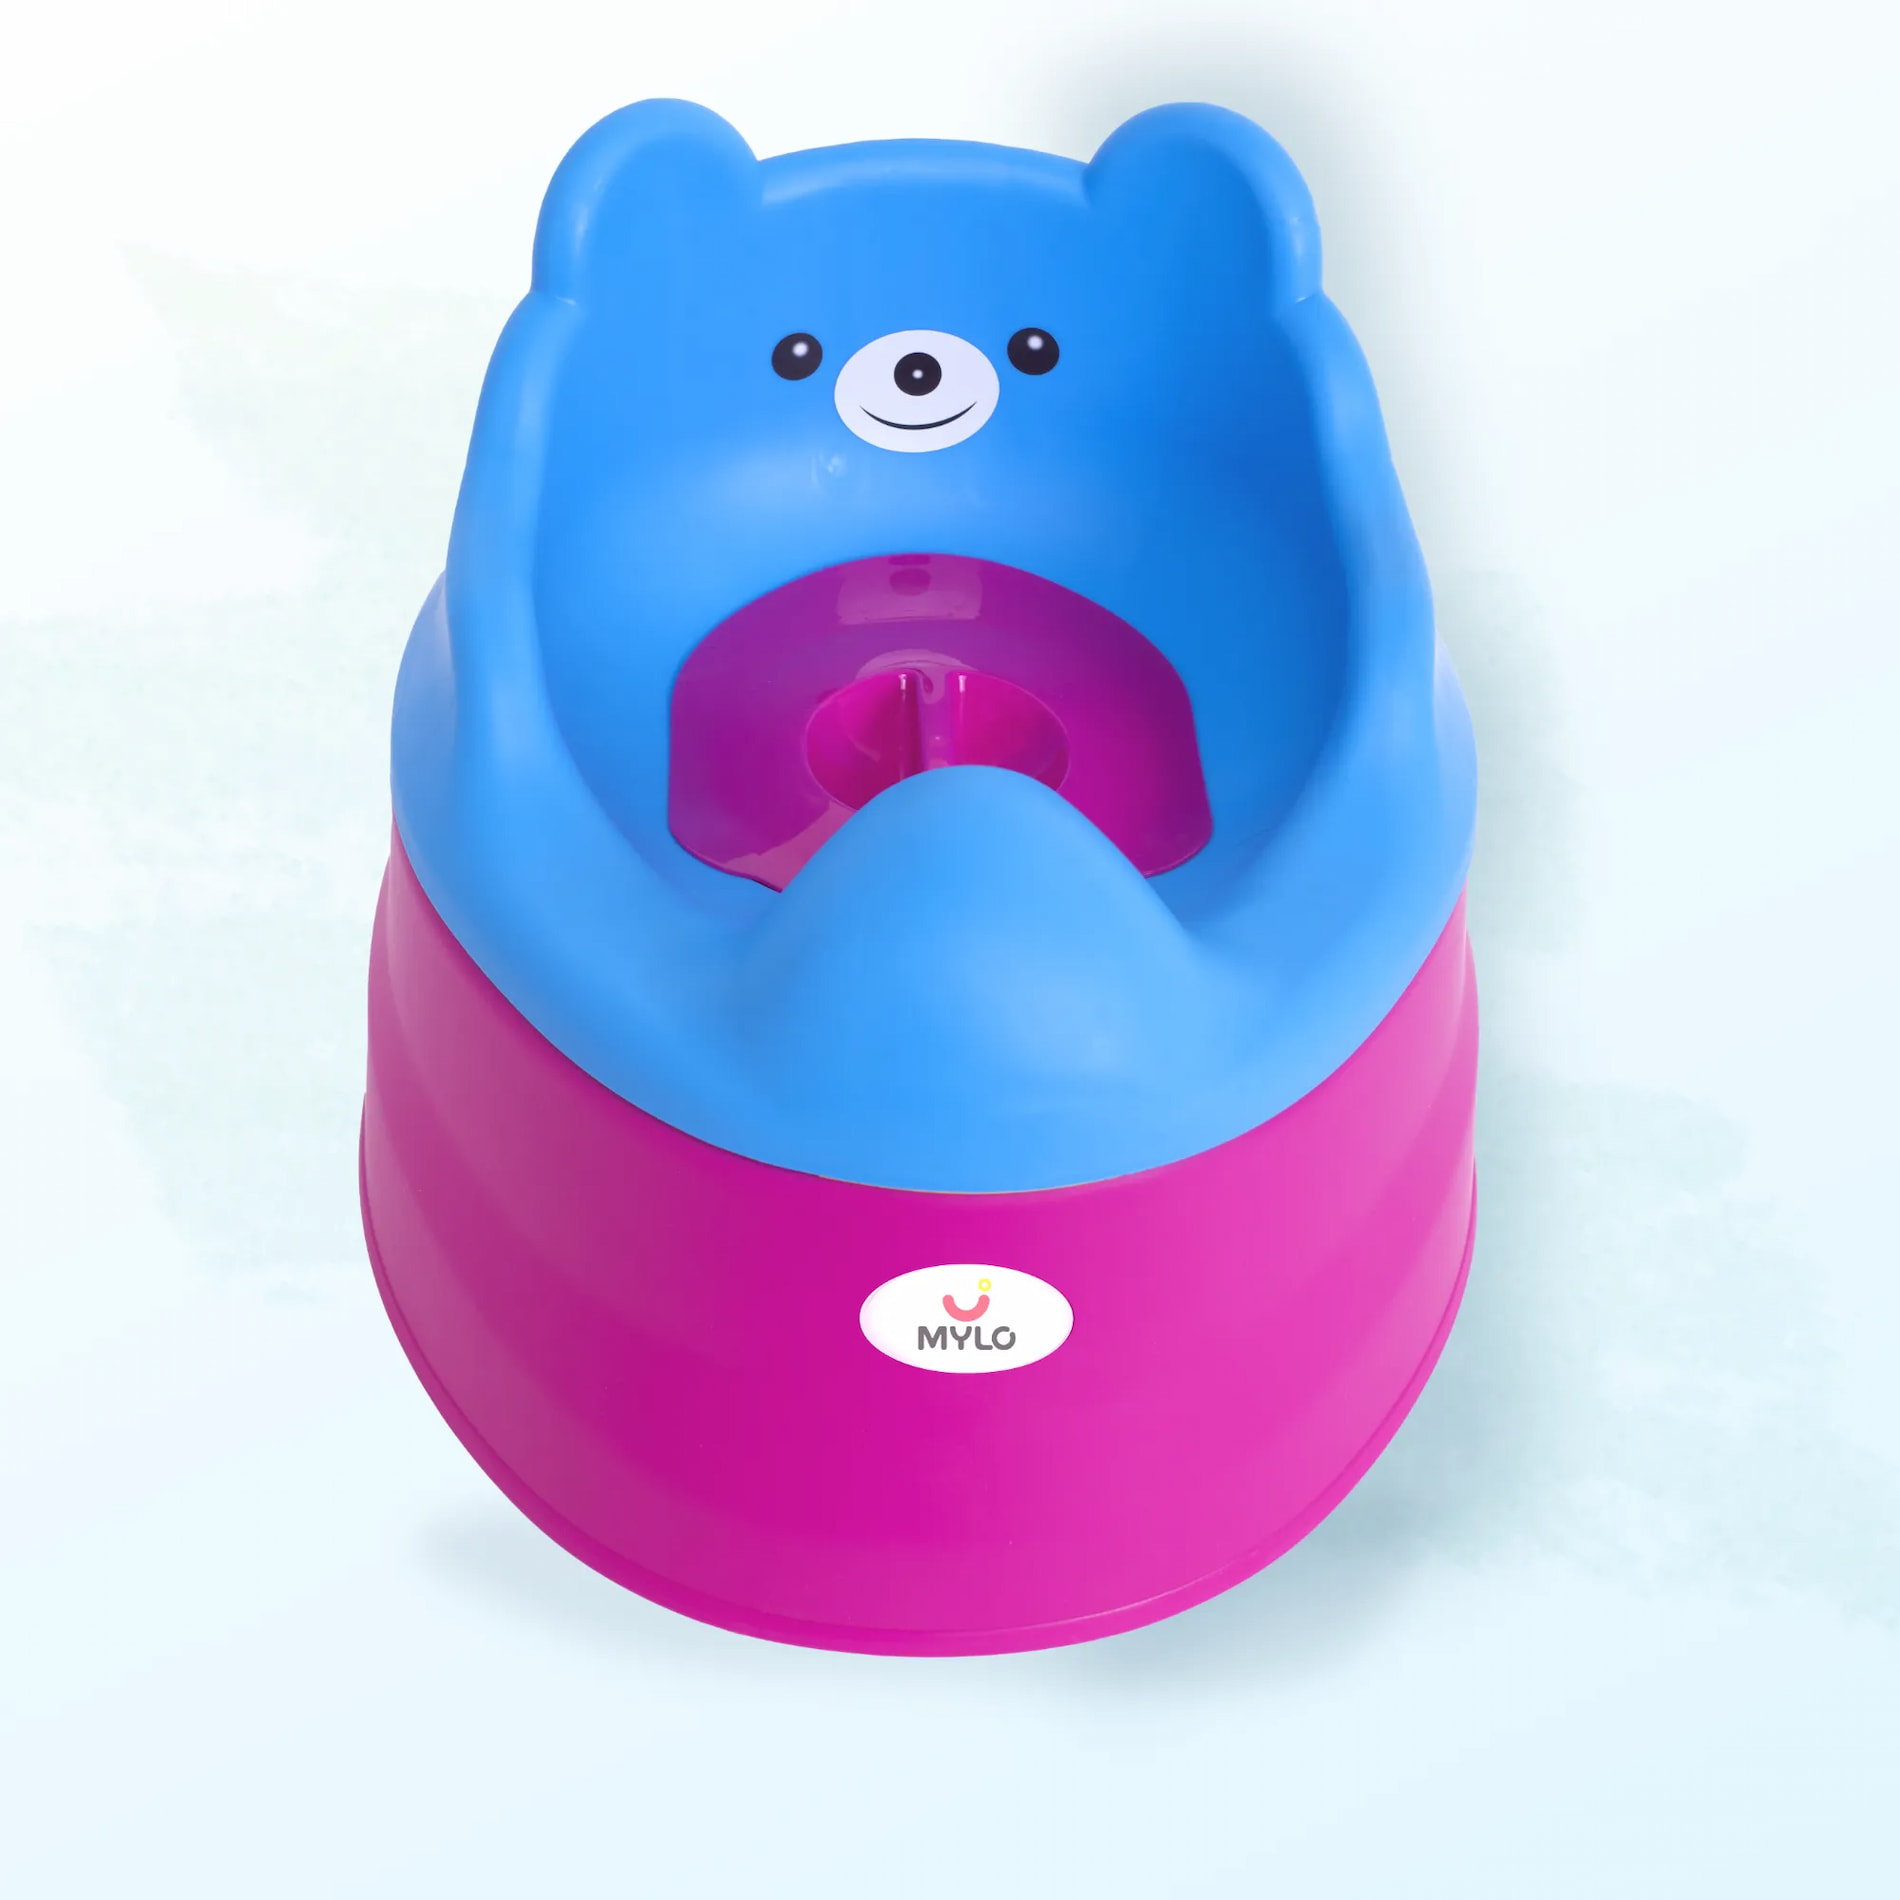 Baby Potty Seat | Baby Potty Chair | 2-in-1 Potty Training Chair with Detachable Potty Bowl | Easy to Carry & Clean - Blue & Purple